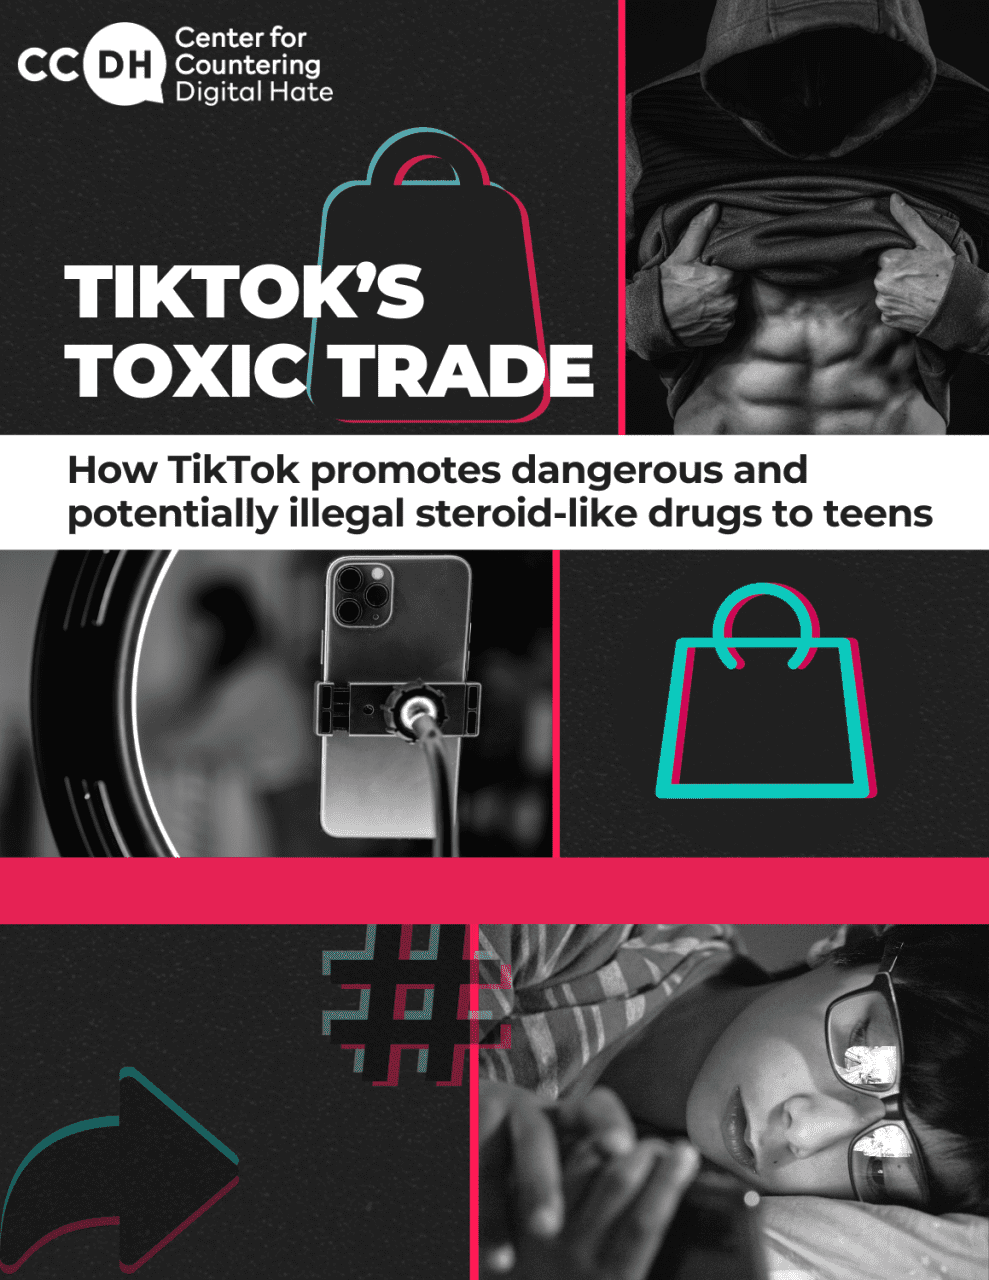 TikTok's Toxic Trade: How TikTok promotes dangerous and potentially illegal steroid-like drugs to teens. New report